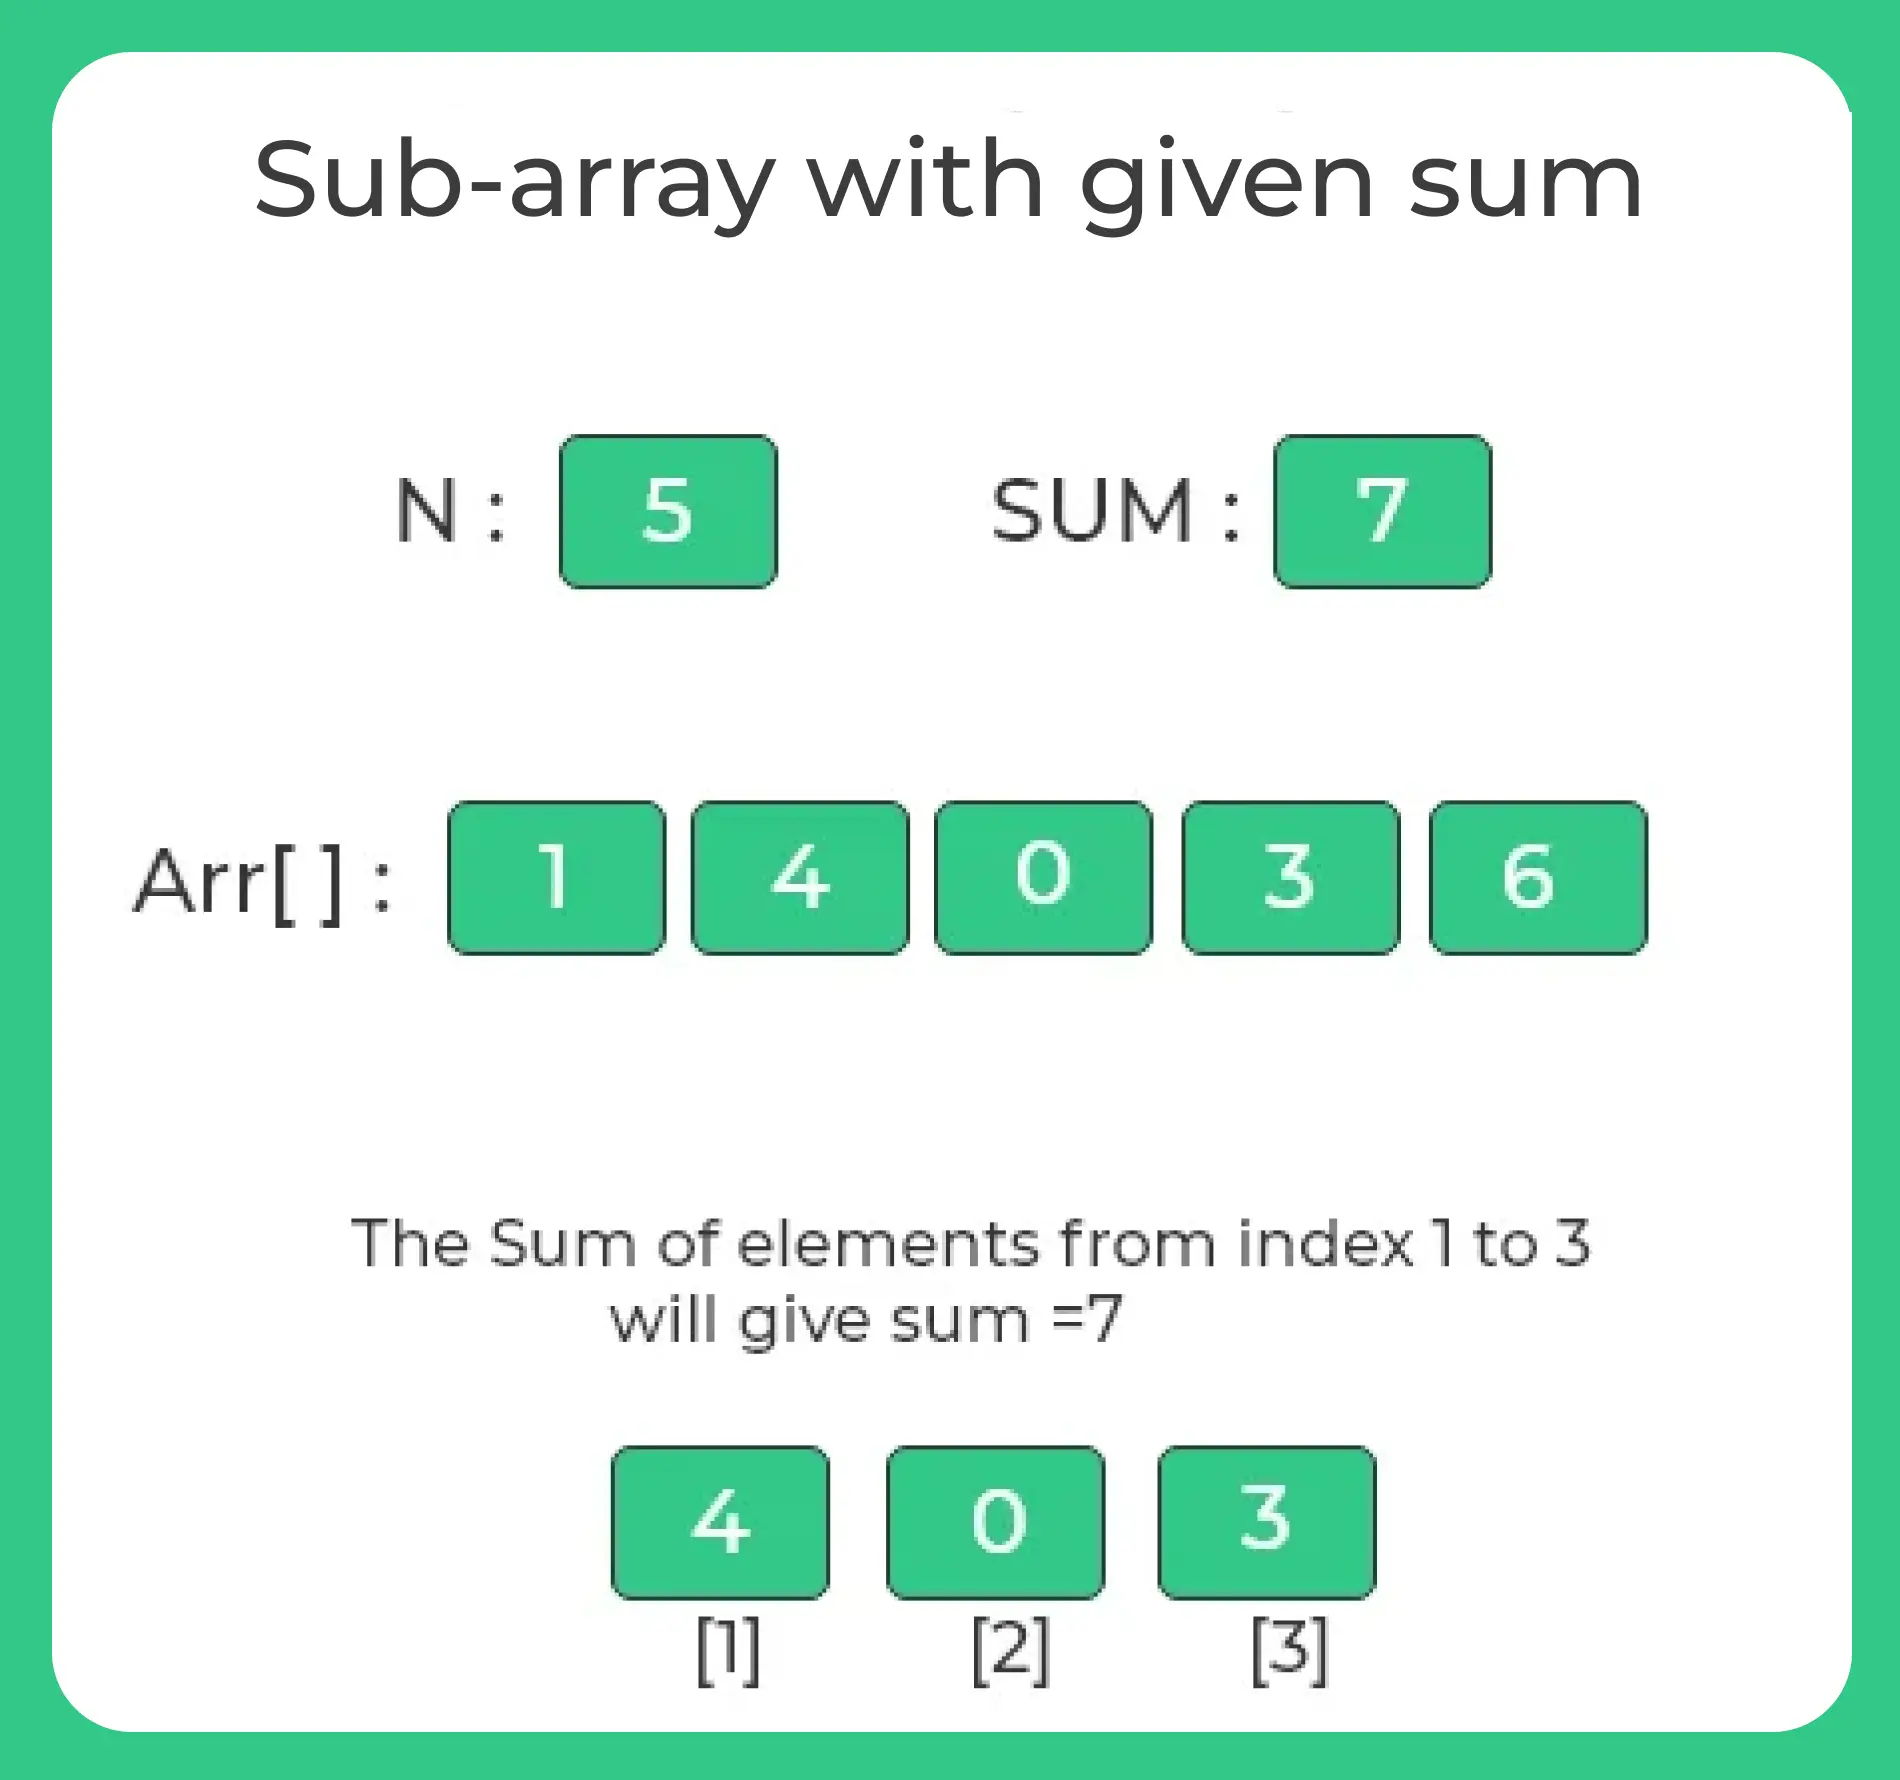 Sub-array with given sum